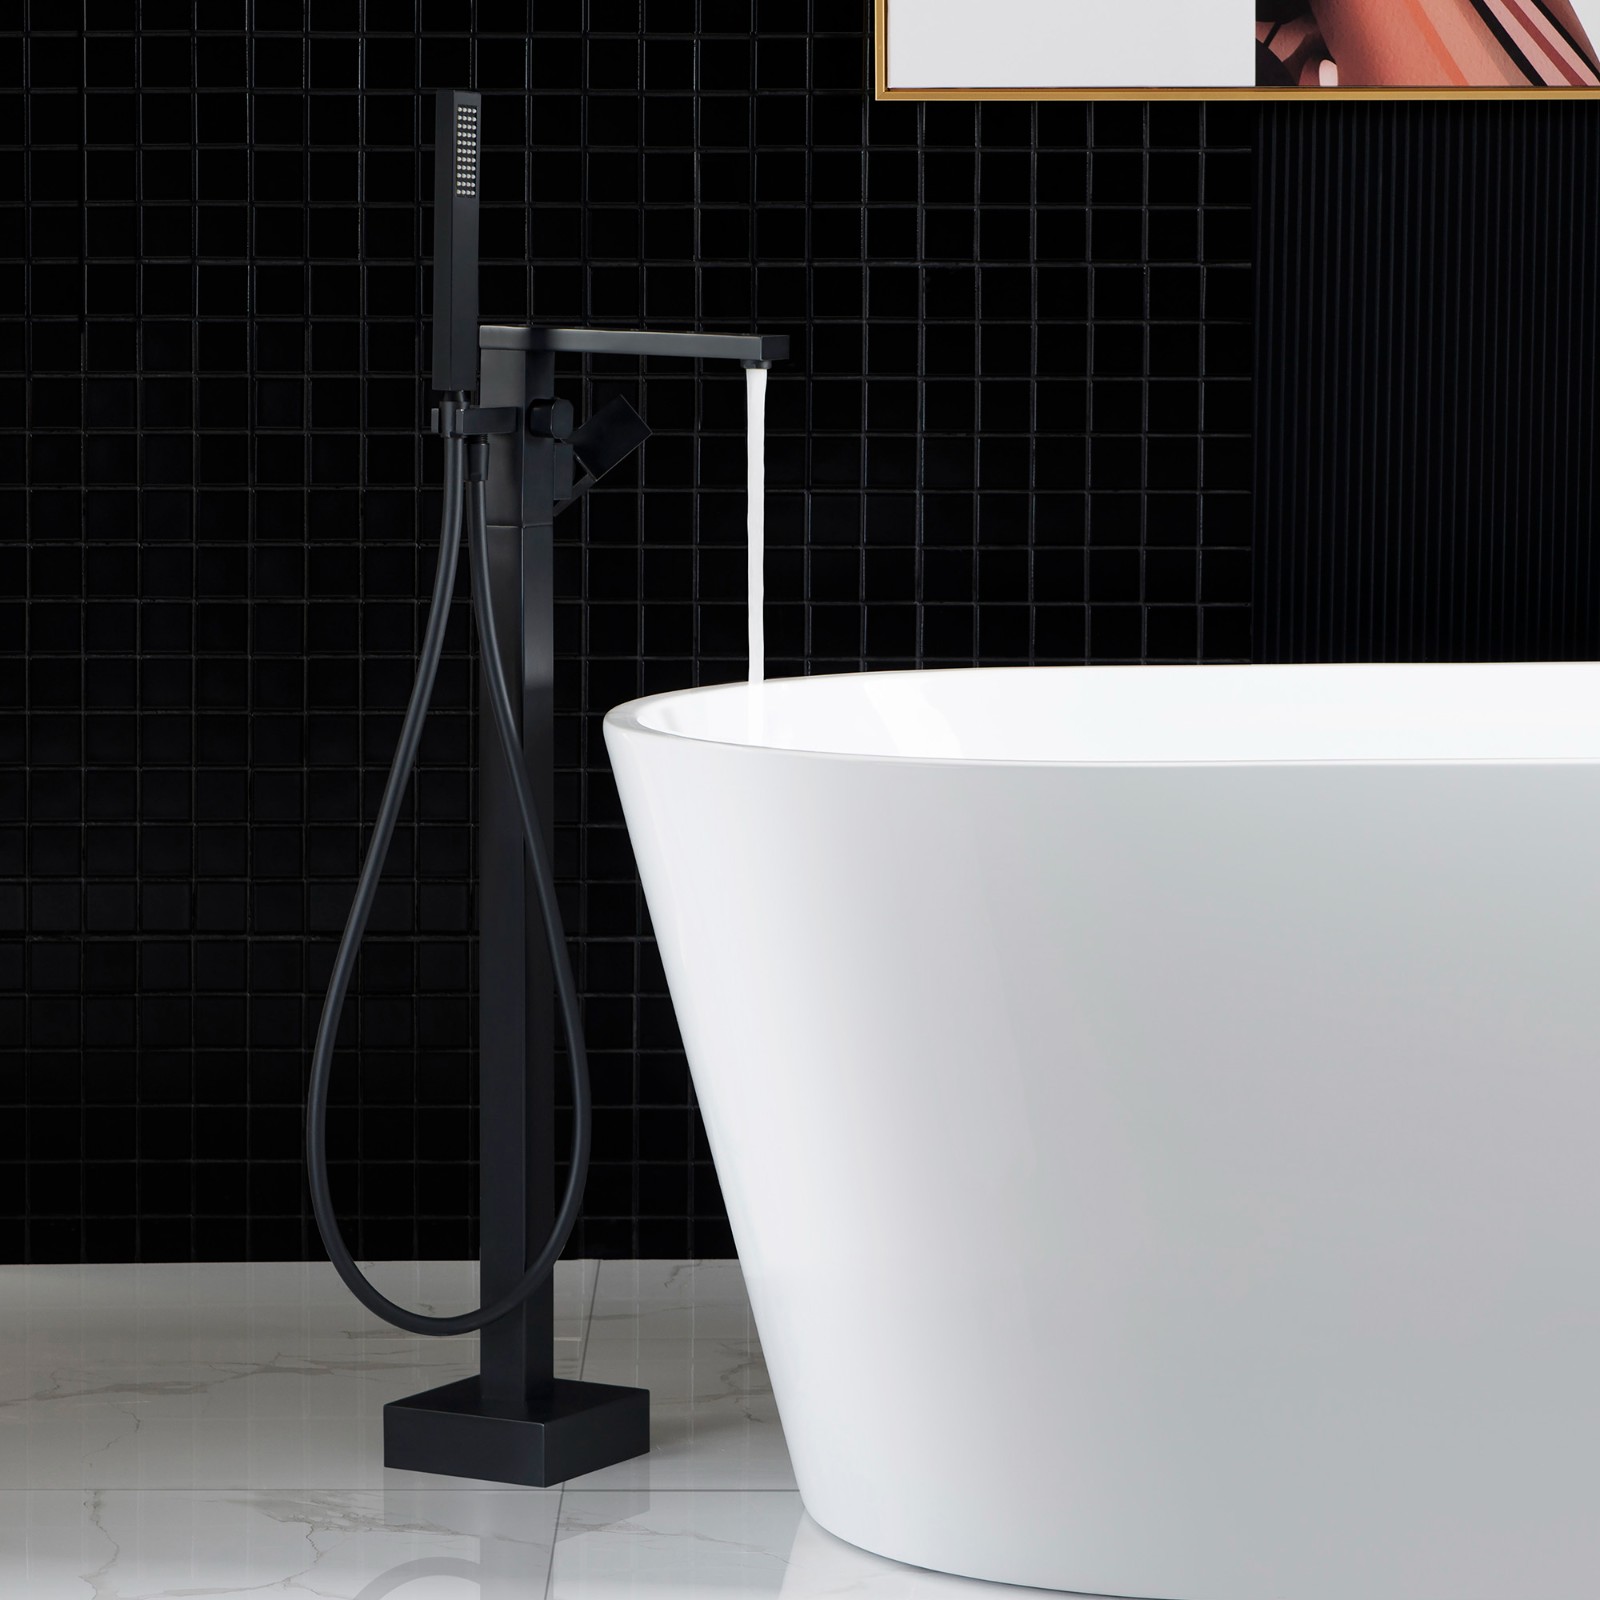  WOODBRIDGE F0009BL Contemporary Single Handle Floor Mount Freestanding Tub Filler Faucet with Hand shower in Matte Black Finish._4215